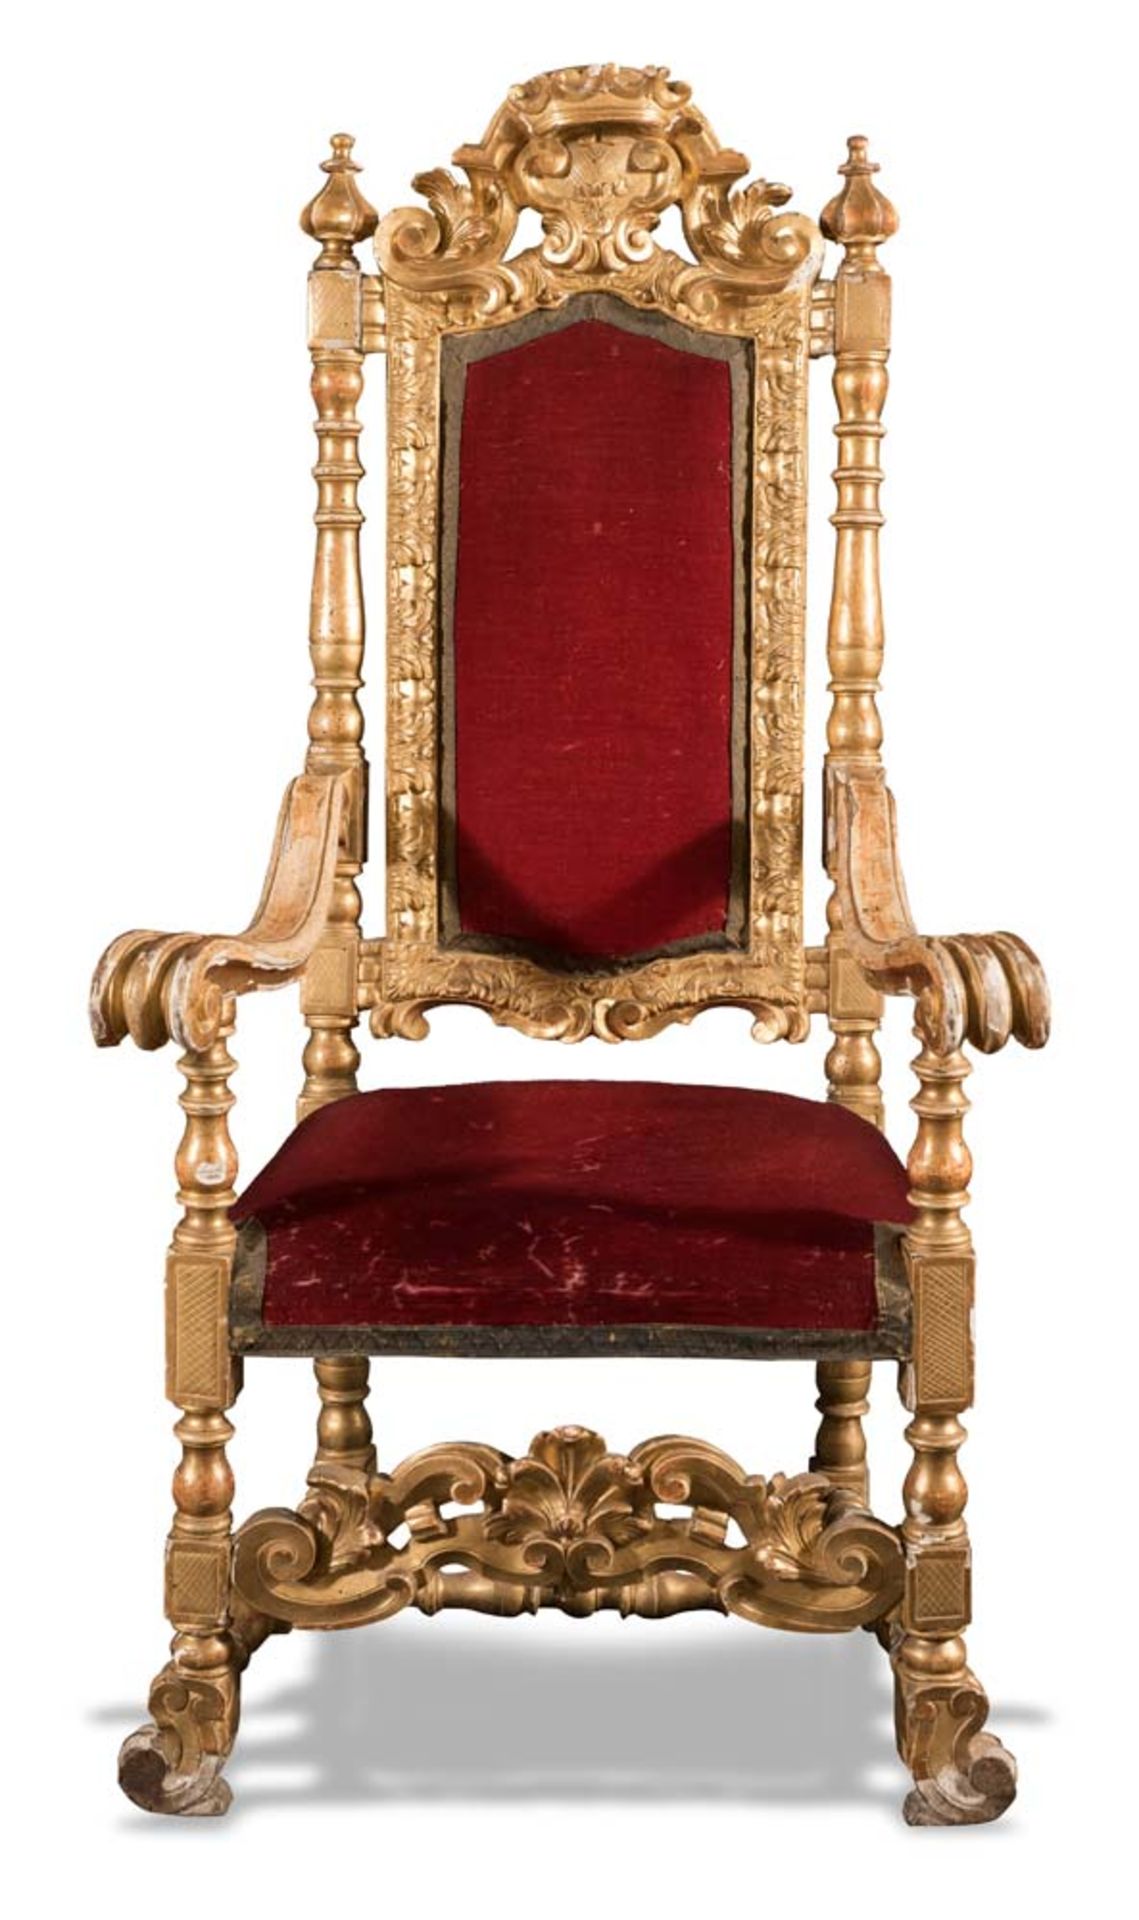 Carved and gilt wood throne, 18th Century.